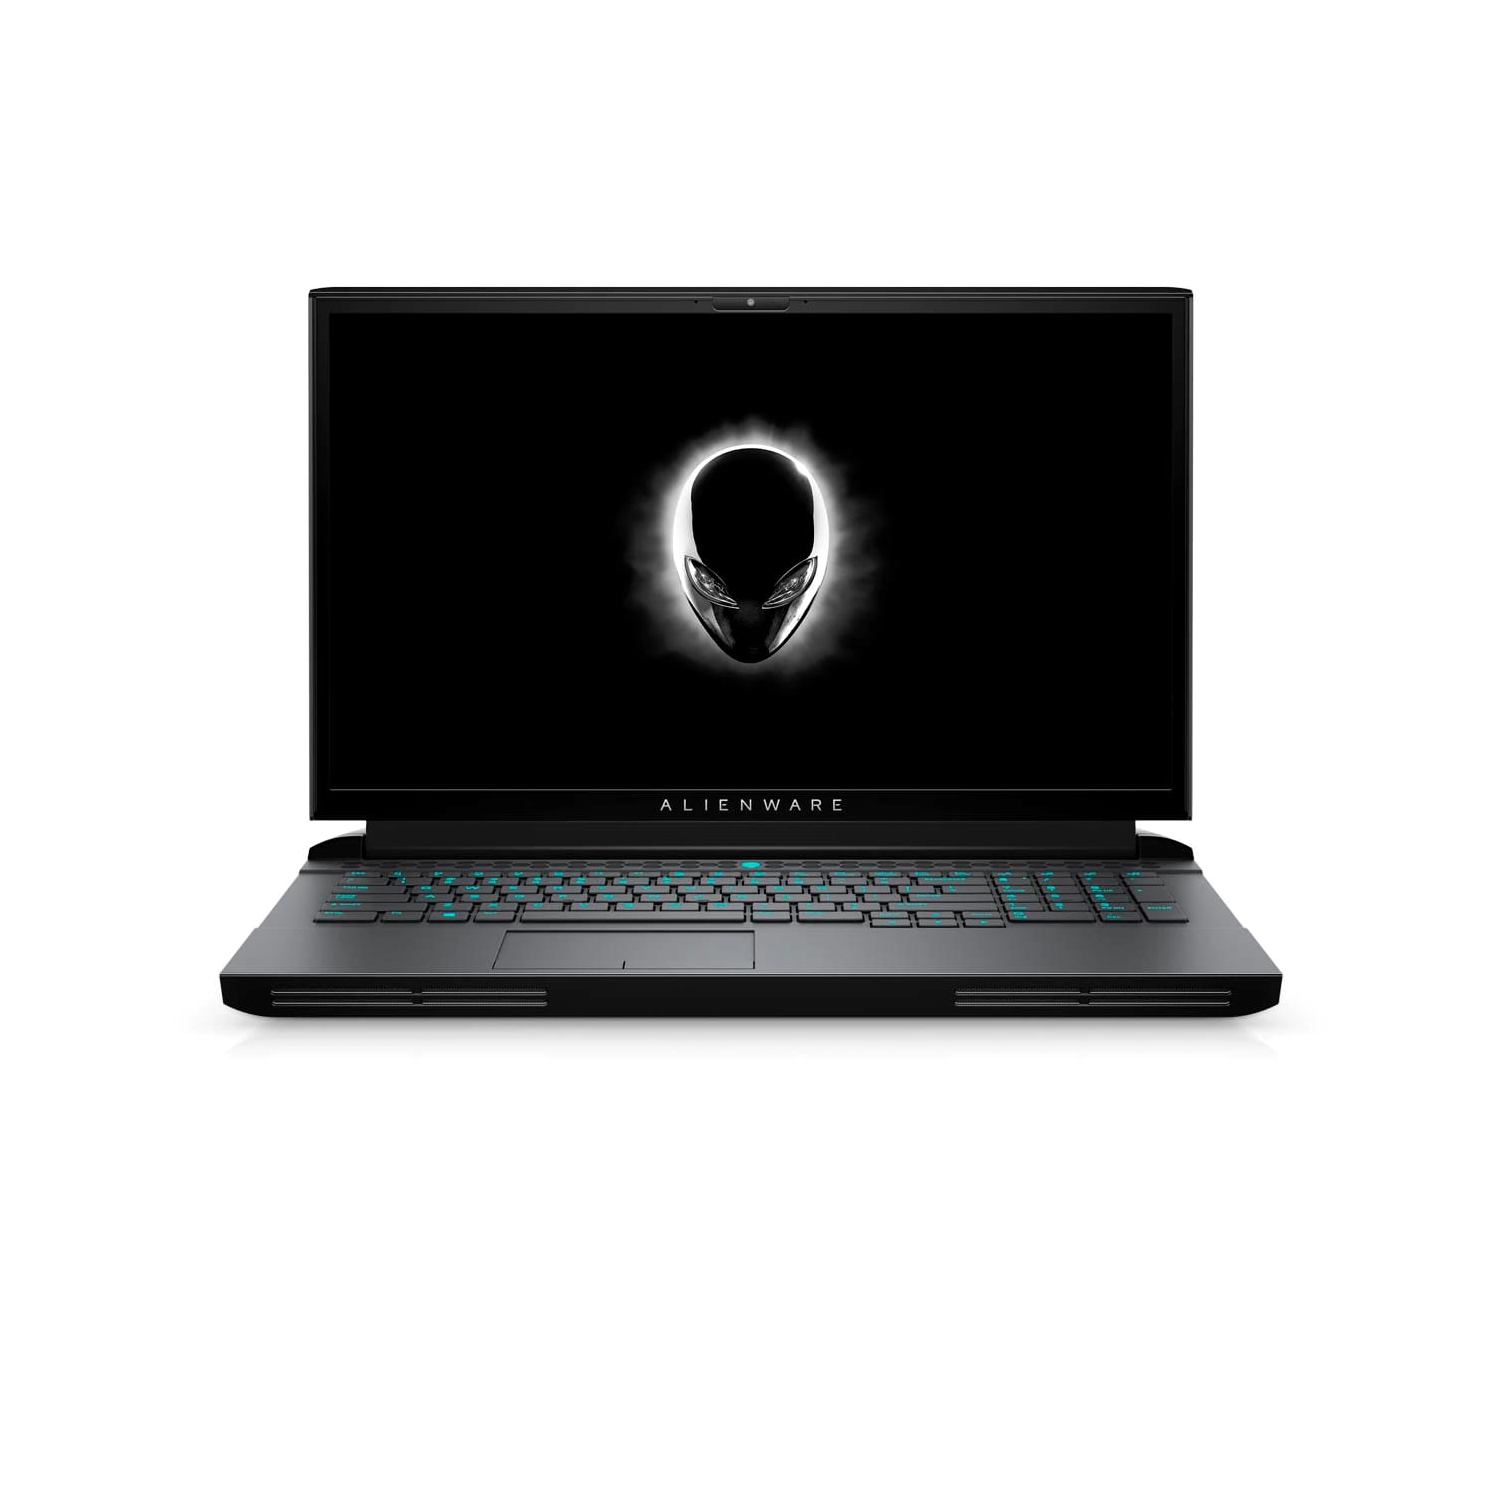 Refurbished (Excellent) - Dell Alienware 17 51m R2 Gaming Laptop (2020), 17.3" FHD, Core i7 - 1TB HDD + 512GB SSD - 32GB RAM - RTX 2060, 4.8 GHz - 10th Gen CPU Certified